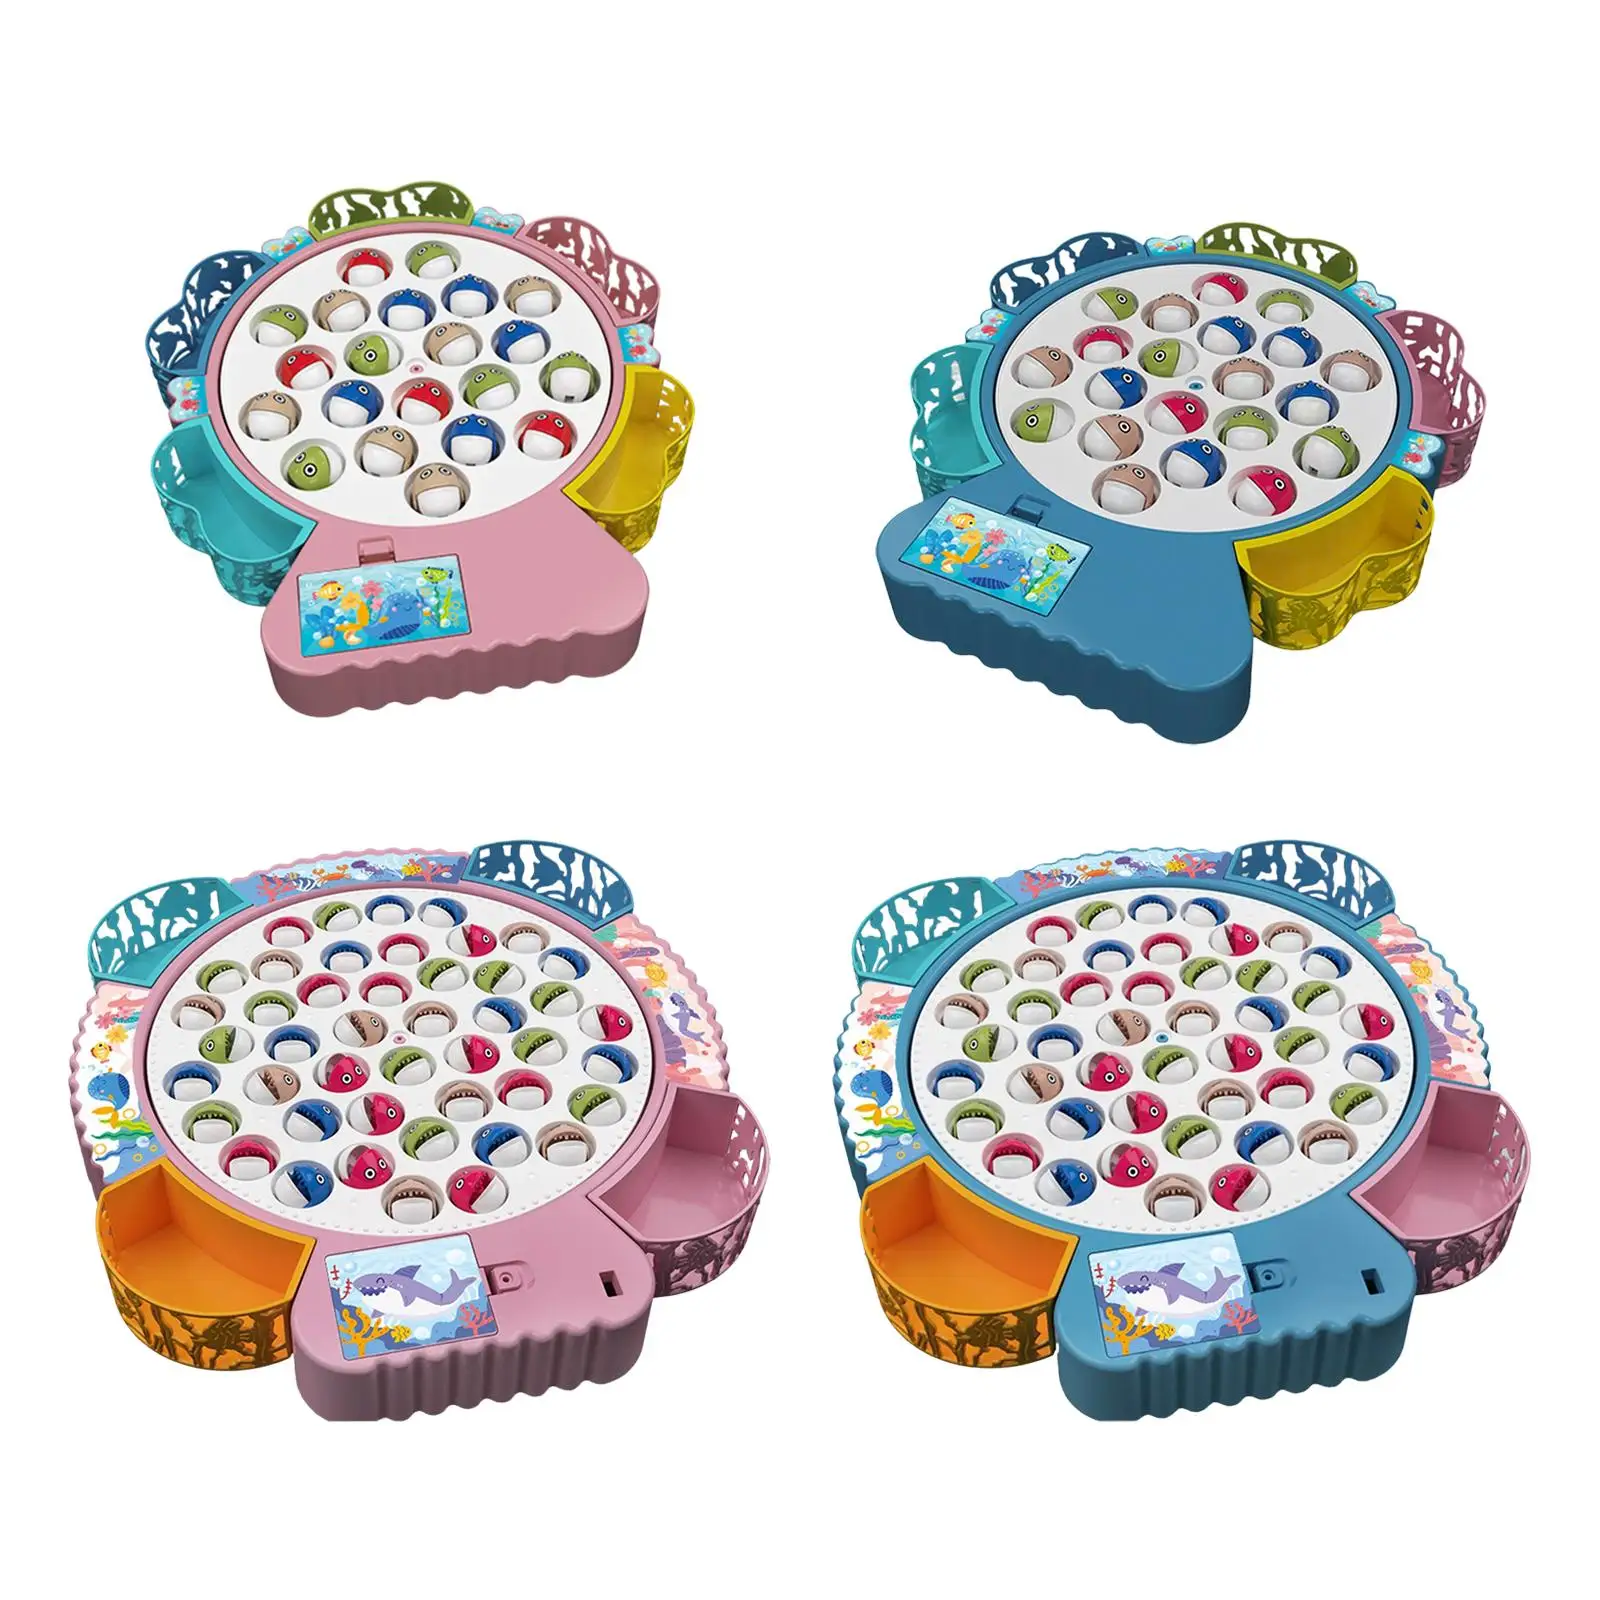 Rotating Fishing Game Colorful with 4 Fishing Poles Board Game Fine Motor Skills for Toddlers Preschool Kid Family Party Favors